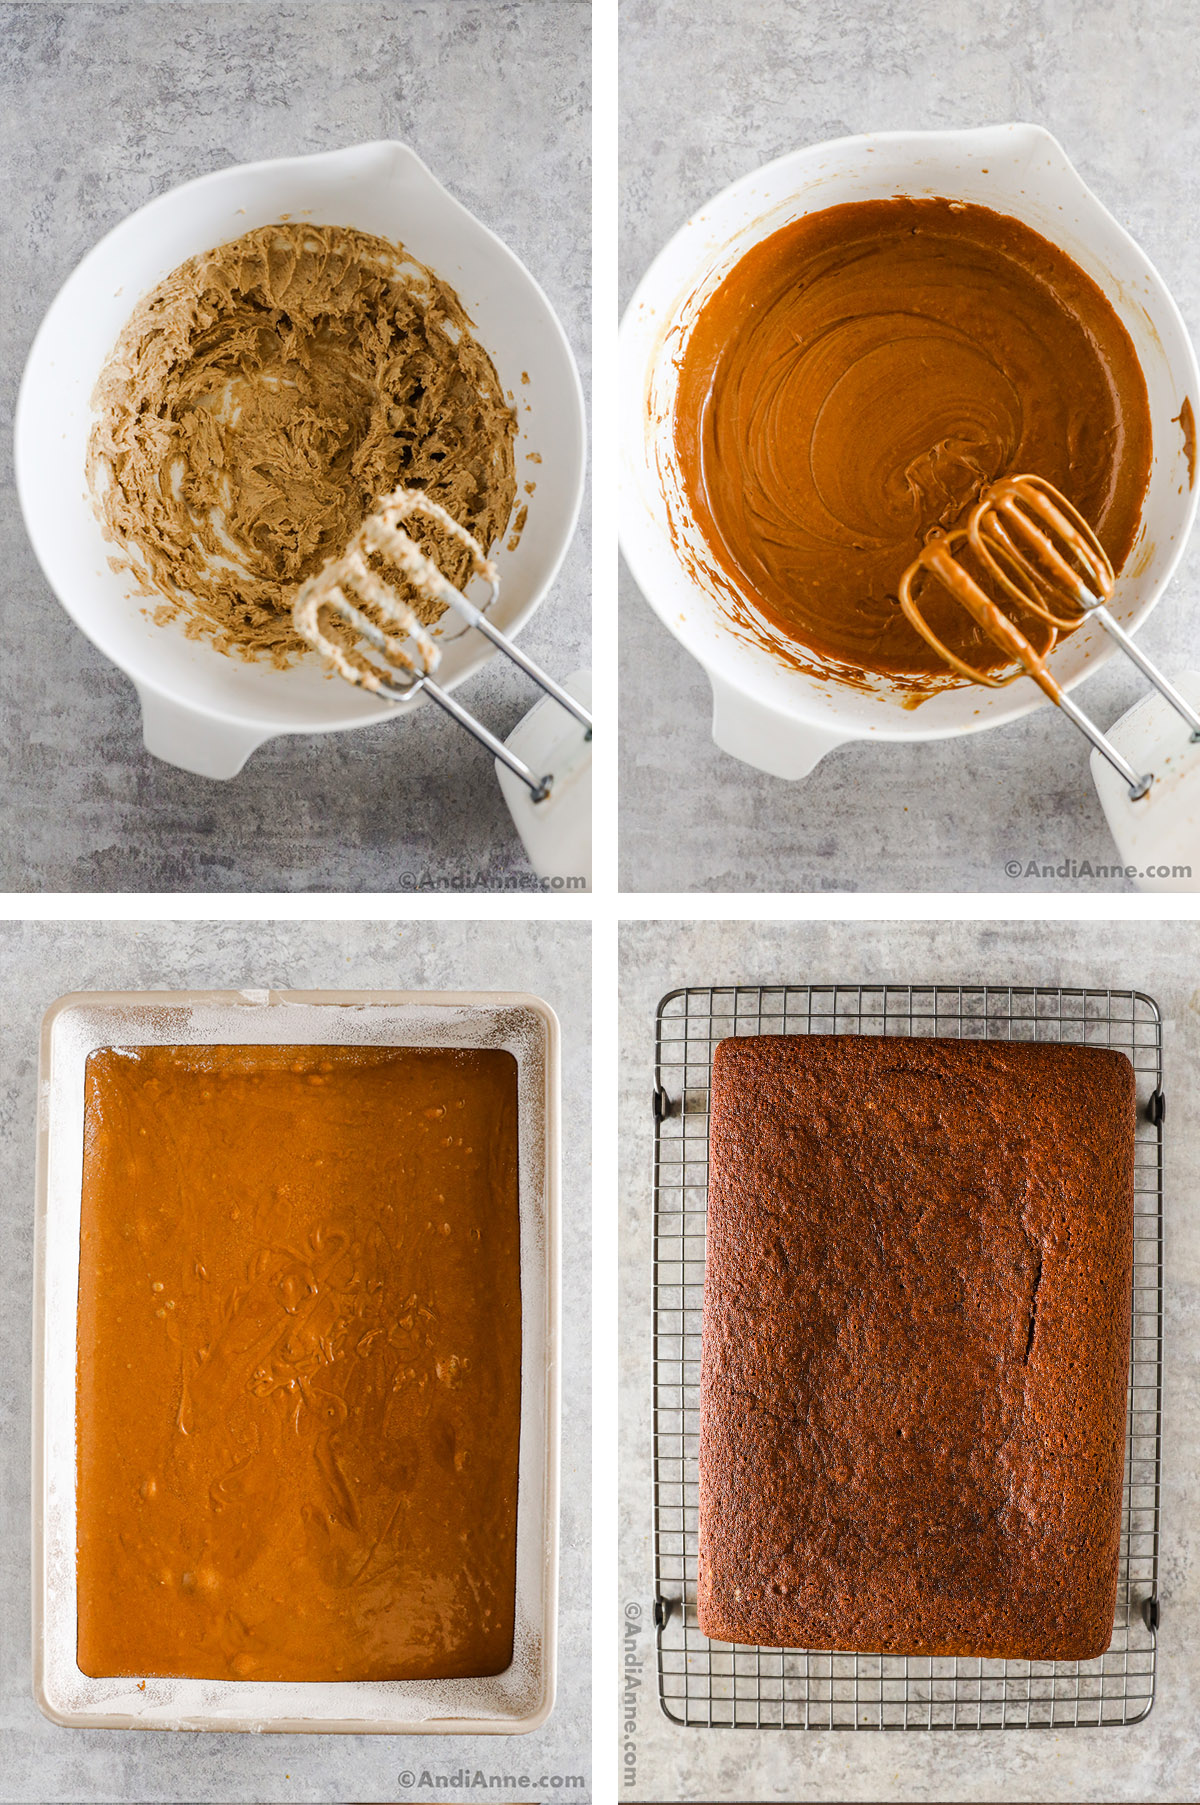 Four images showing steps to make recipe. First is creamed butter and sugar in bowl with handmixer. Second is smooth and creamy wet ingredients  in bowl. Third is cake batter poured in to cake pan. Fourth is baked cake cooling on a rack.